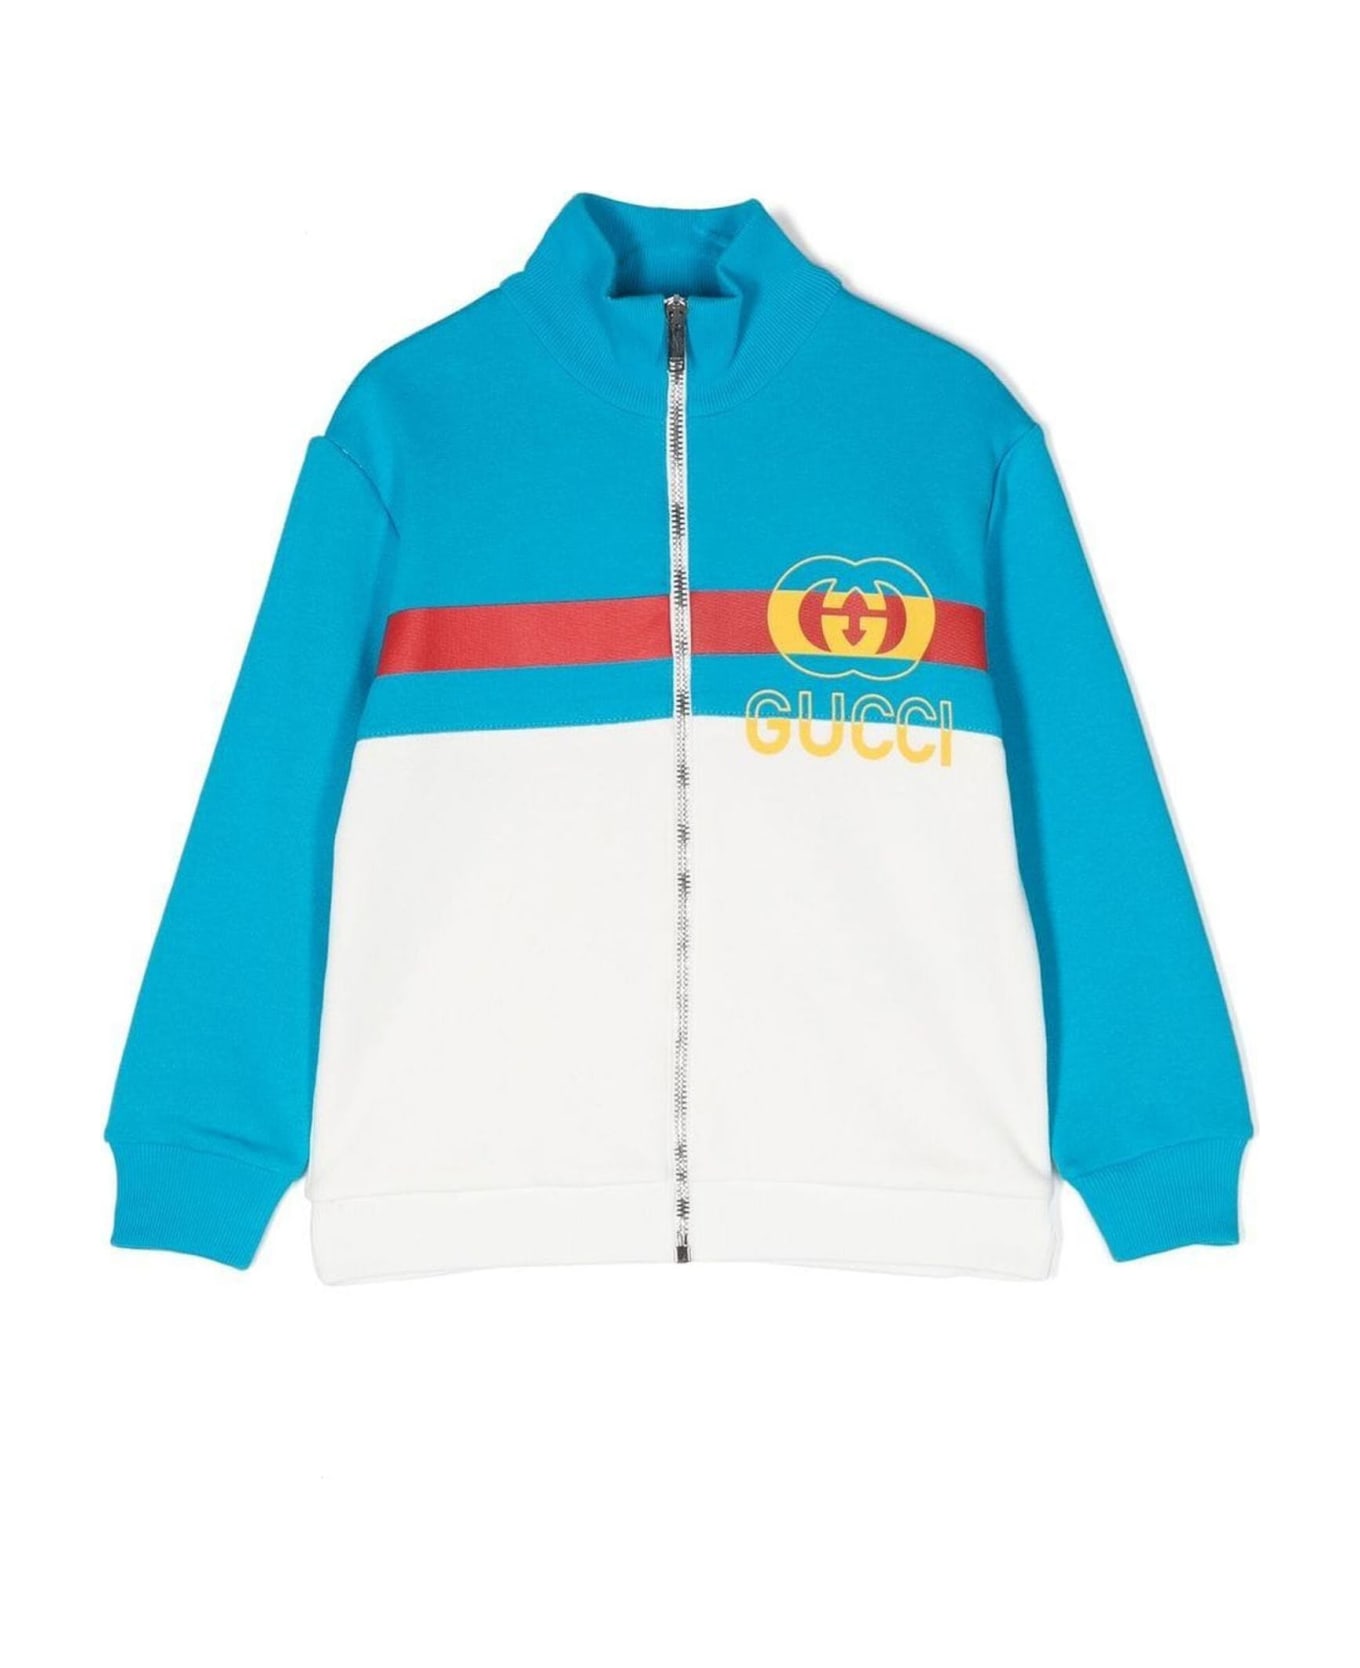 Gucci Blue And White Cotton Track Jacket - New White